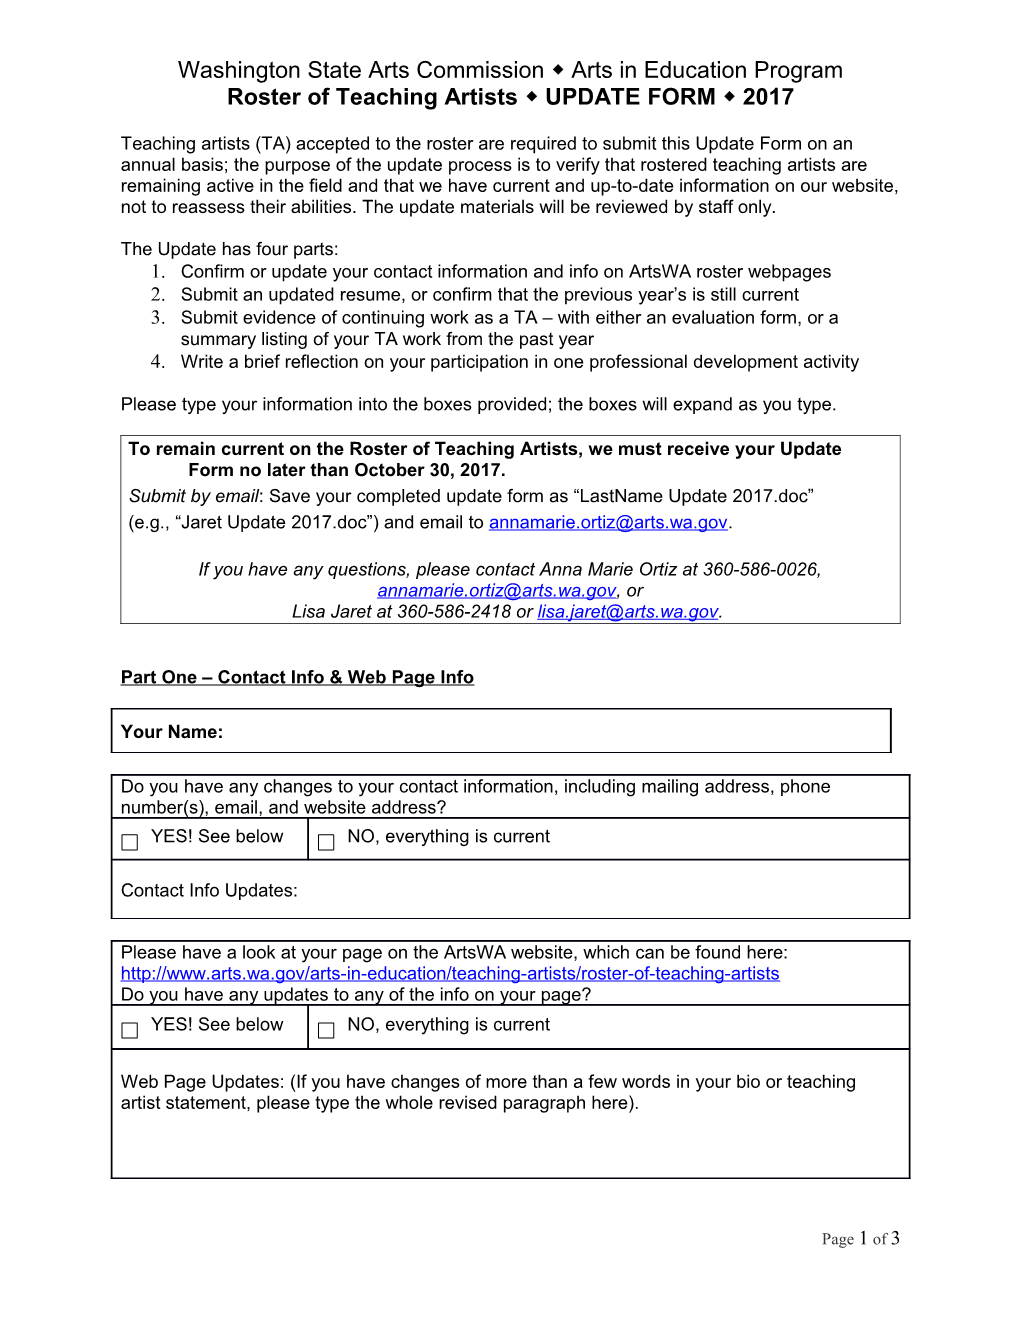 WSAC Roster of Teaching Artists Annual Update Form